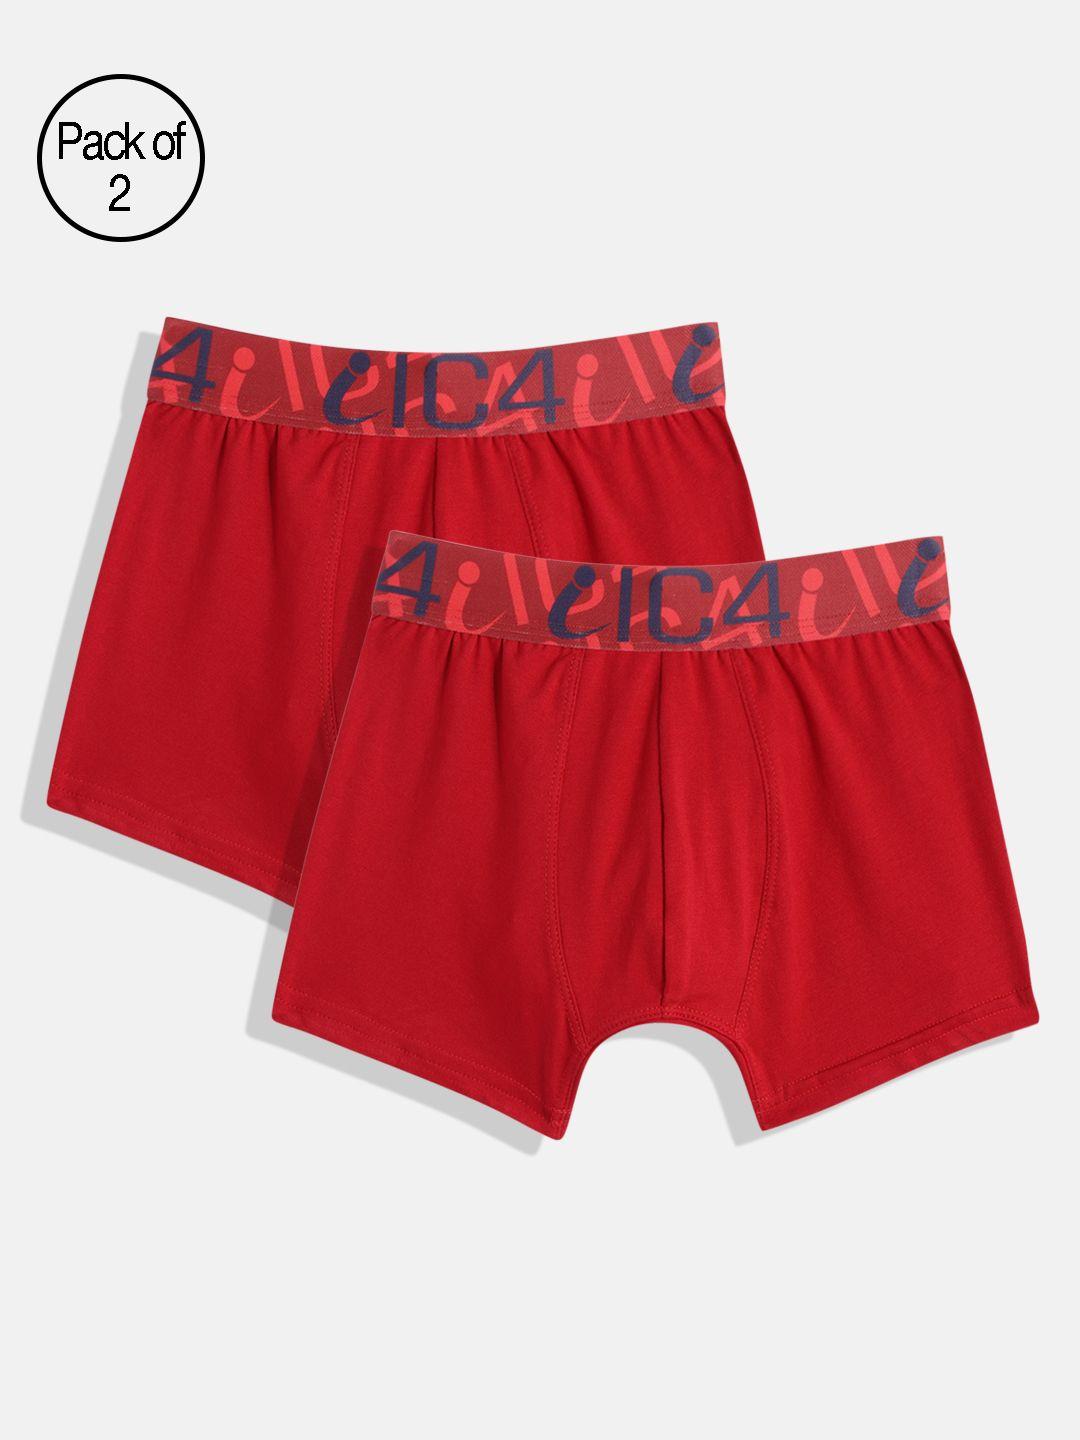 ic4 boys pack of 2 red solid trunks